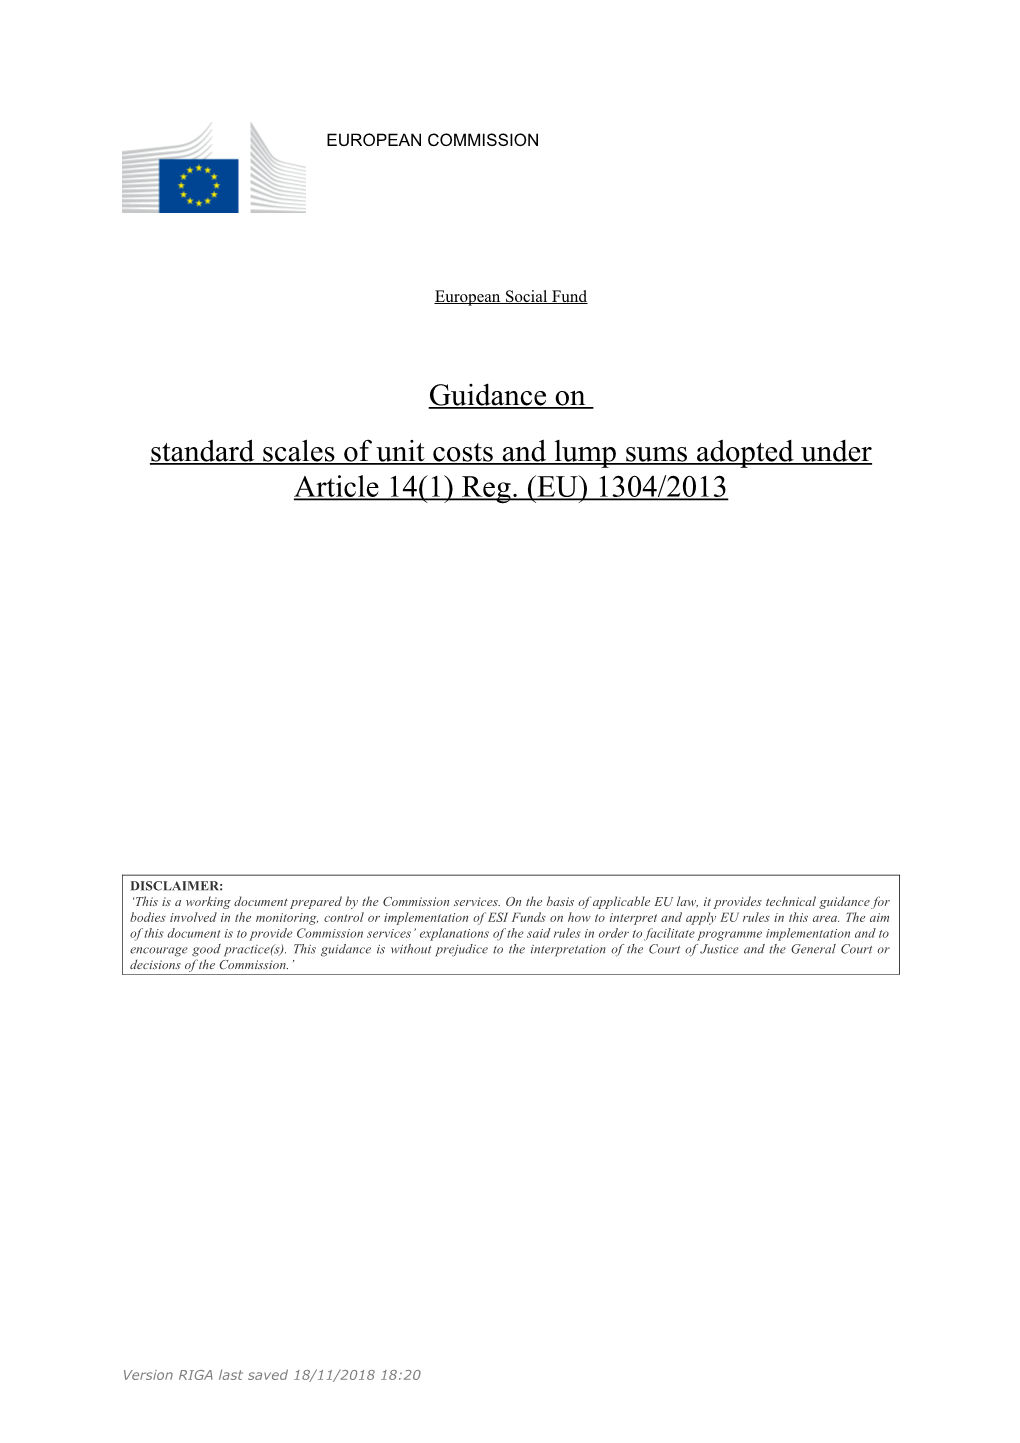 Standard Scales of Unit Costs and Lump Sums Adopted Underarticle 14(1) Reg. (EU) 1304/2013